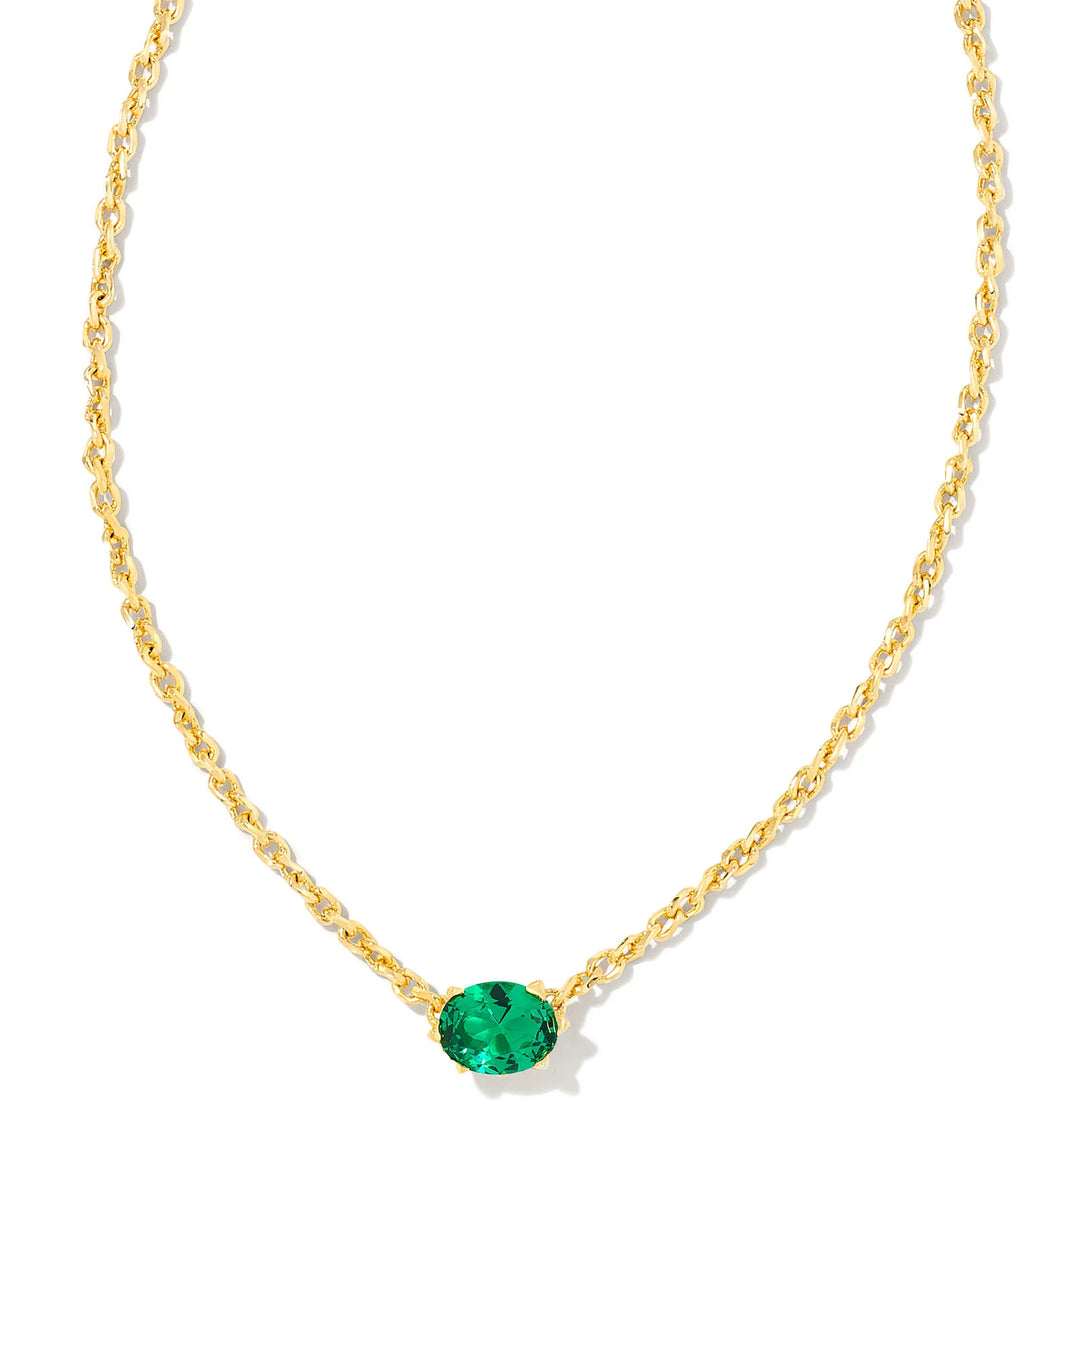 CAILIN CRYSTAL PENDANT NECKLACE - GOLD GREEN CRYSTAL